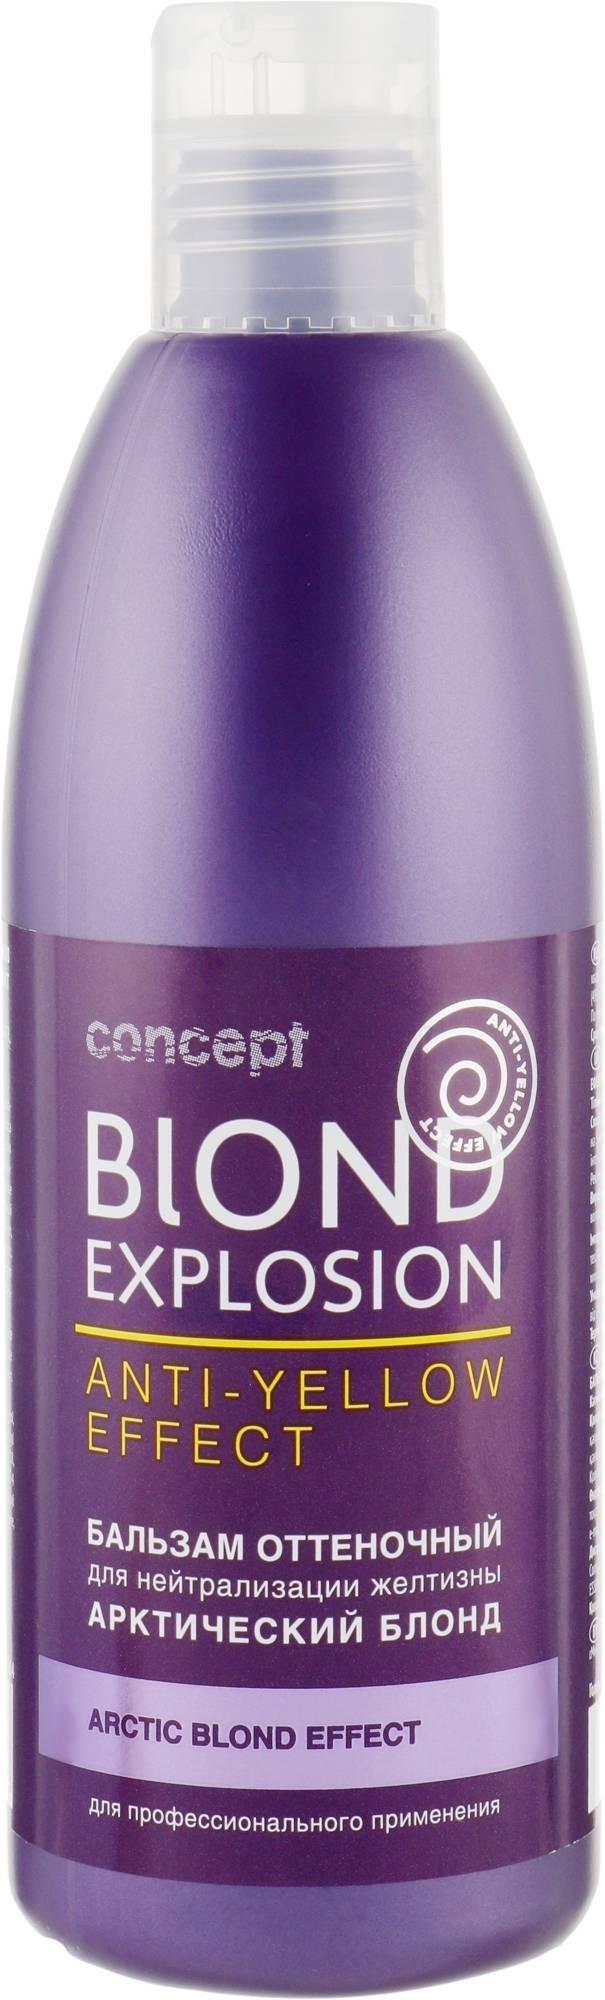 Concept Blond Explosion Anti-yellow effect